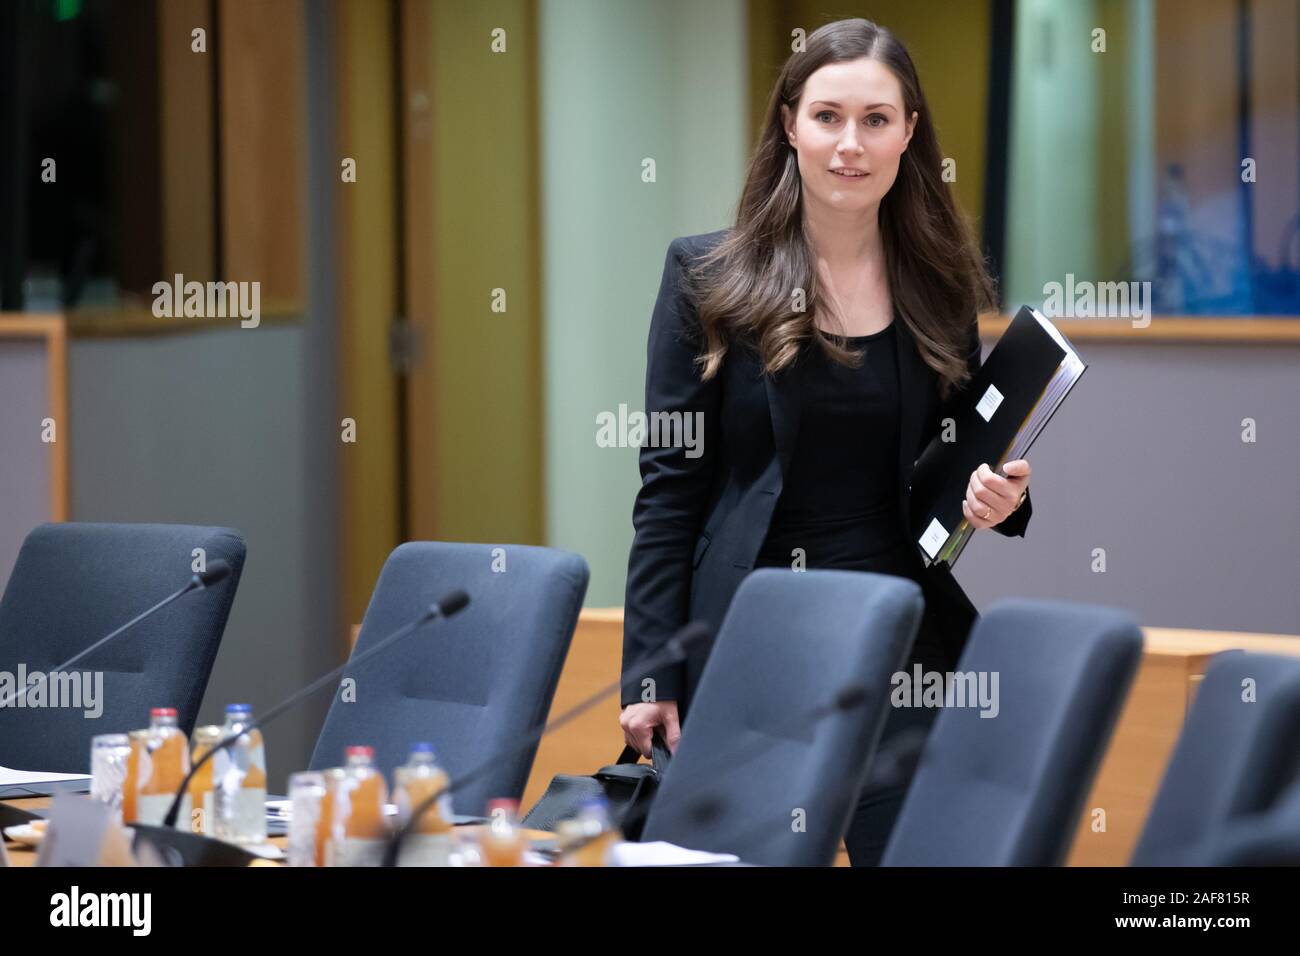 December 13, 2019: Brussels, Belgium 13.12.2019 Finnish Prime Minister Sanna Marin at the European Union leaders year-end summit in Brussels. Credit: JP Black/ZUMA Wire/Alamy Live News Stock Photo